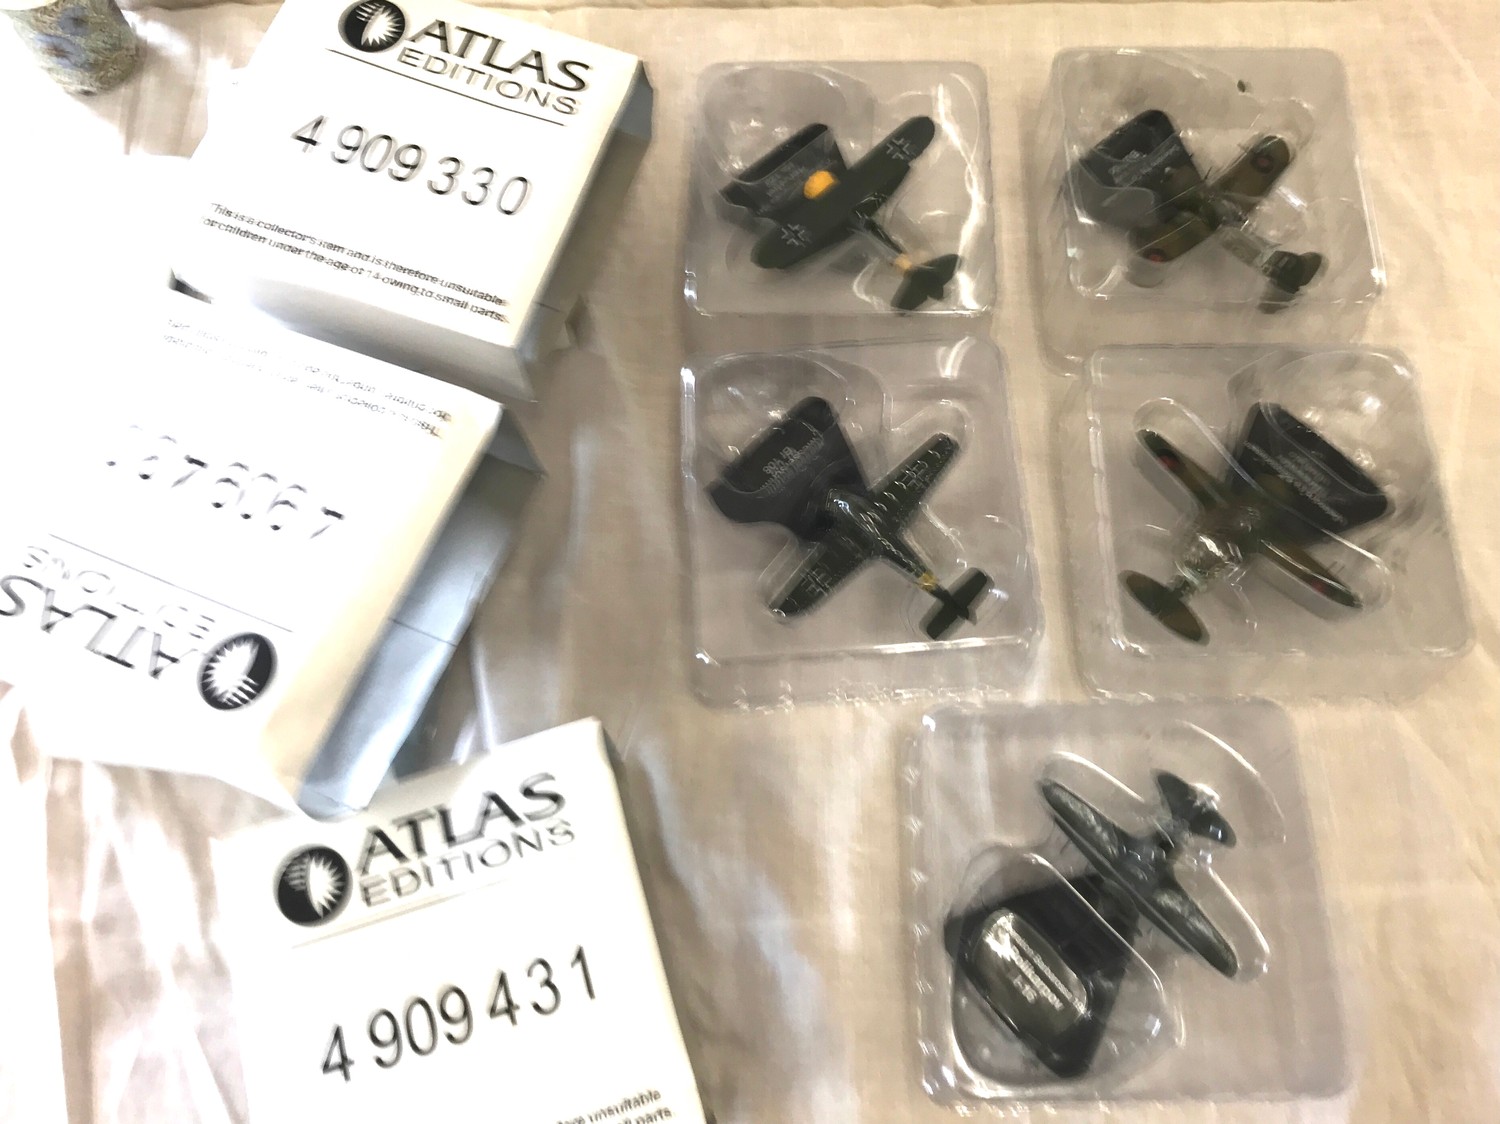 Boxed Atlas addition models, inclued A909 431, a909 430, a909330, a909431 - Image 4 of 4